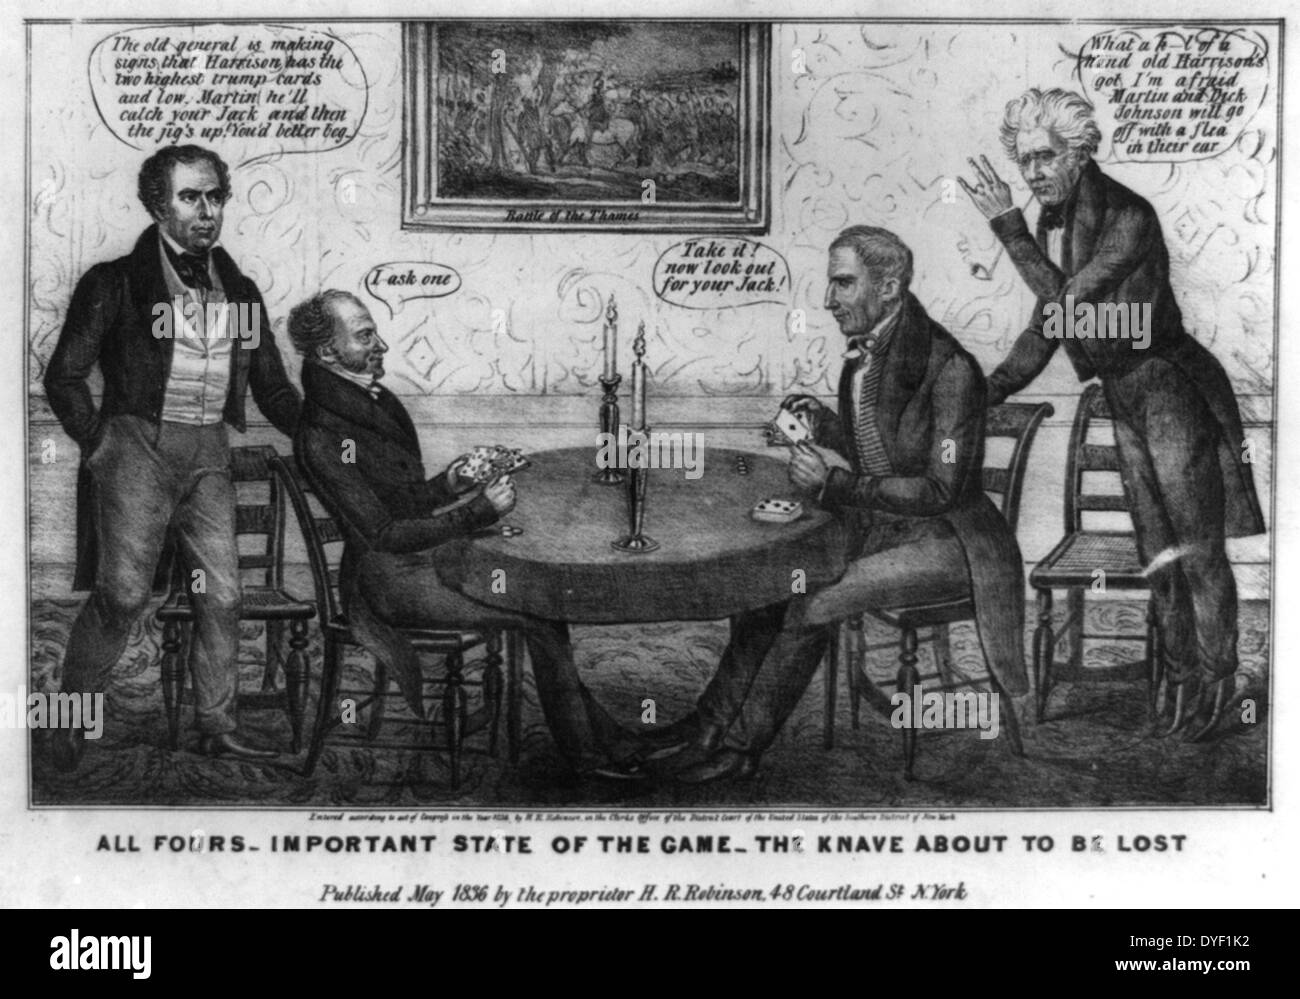 All fours-important state of the game-the knave about to be lost by H.R. Robinson, 1836. Lithograph print on wove paper. Political cartoon satirising the presidential campaign of 1836. Shown here as a card game between Democrat Martin Van Buren and Whig William Henry Harrison. The cartoon supports the Whigs. Stock Photo